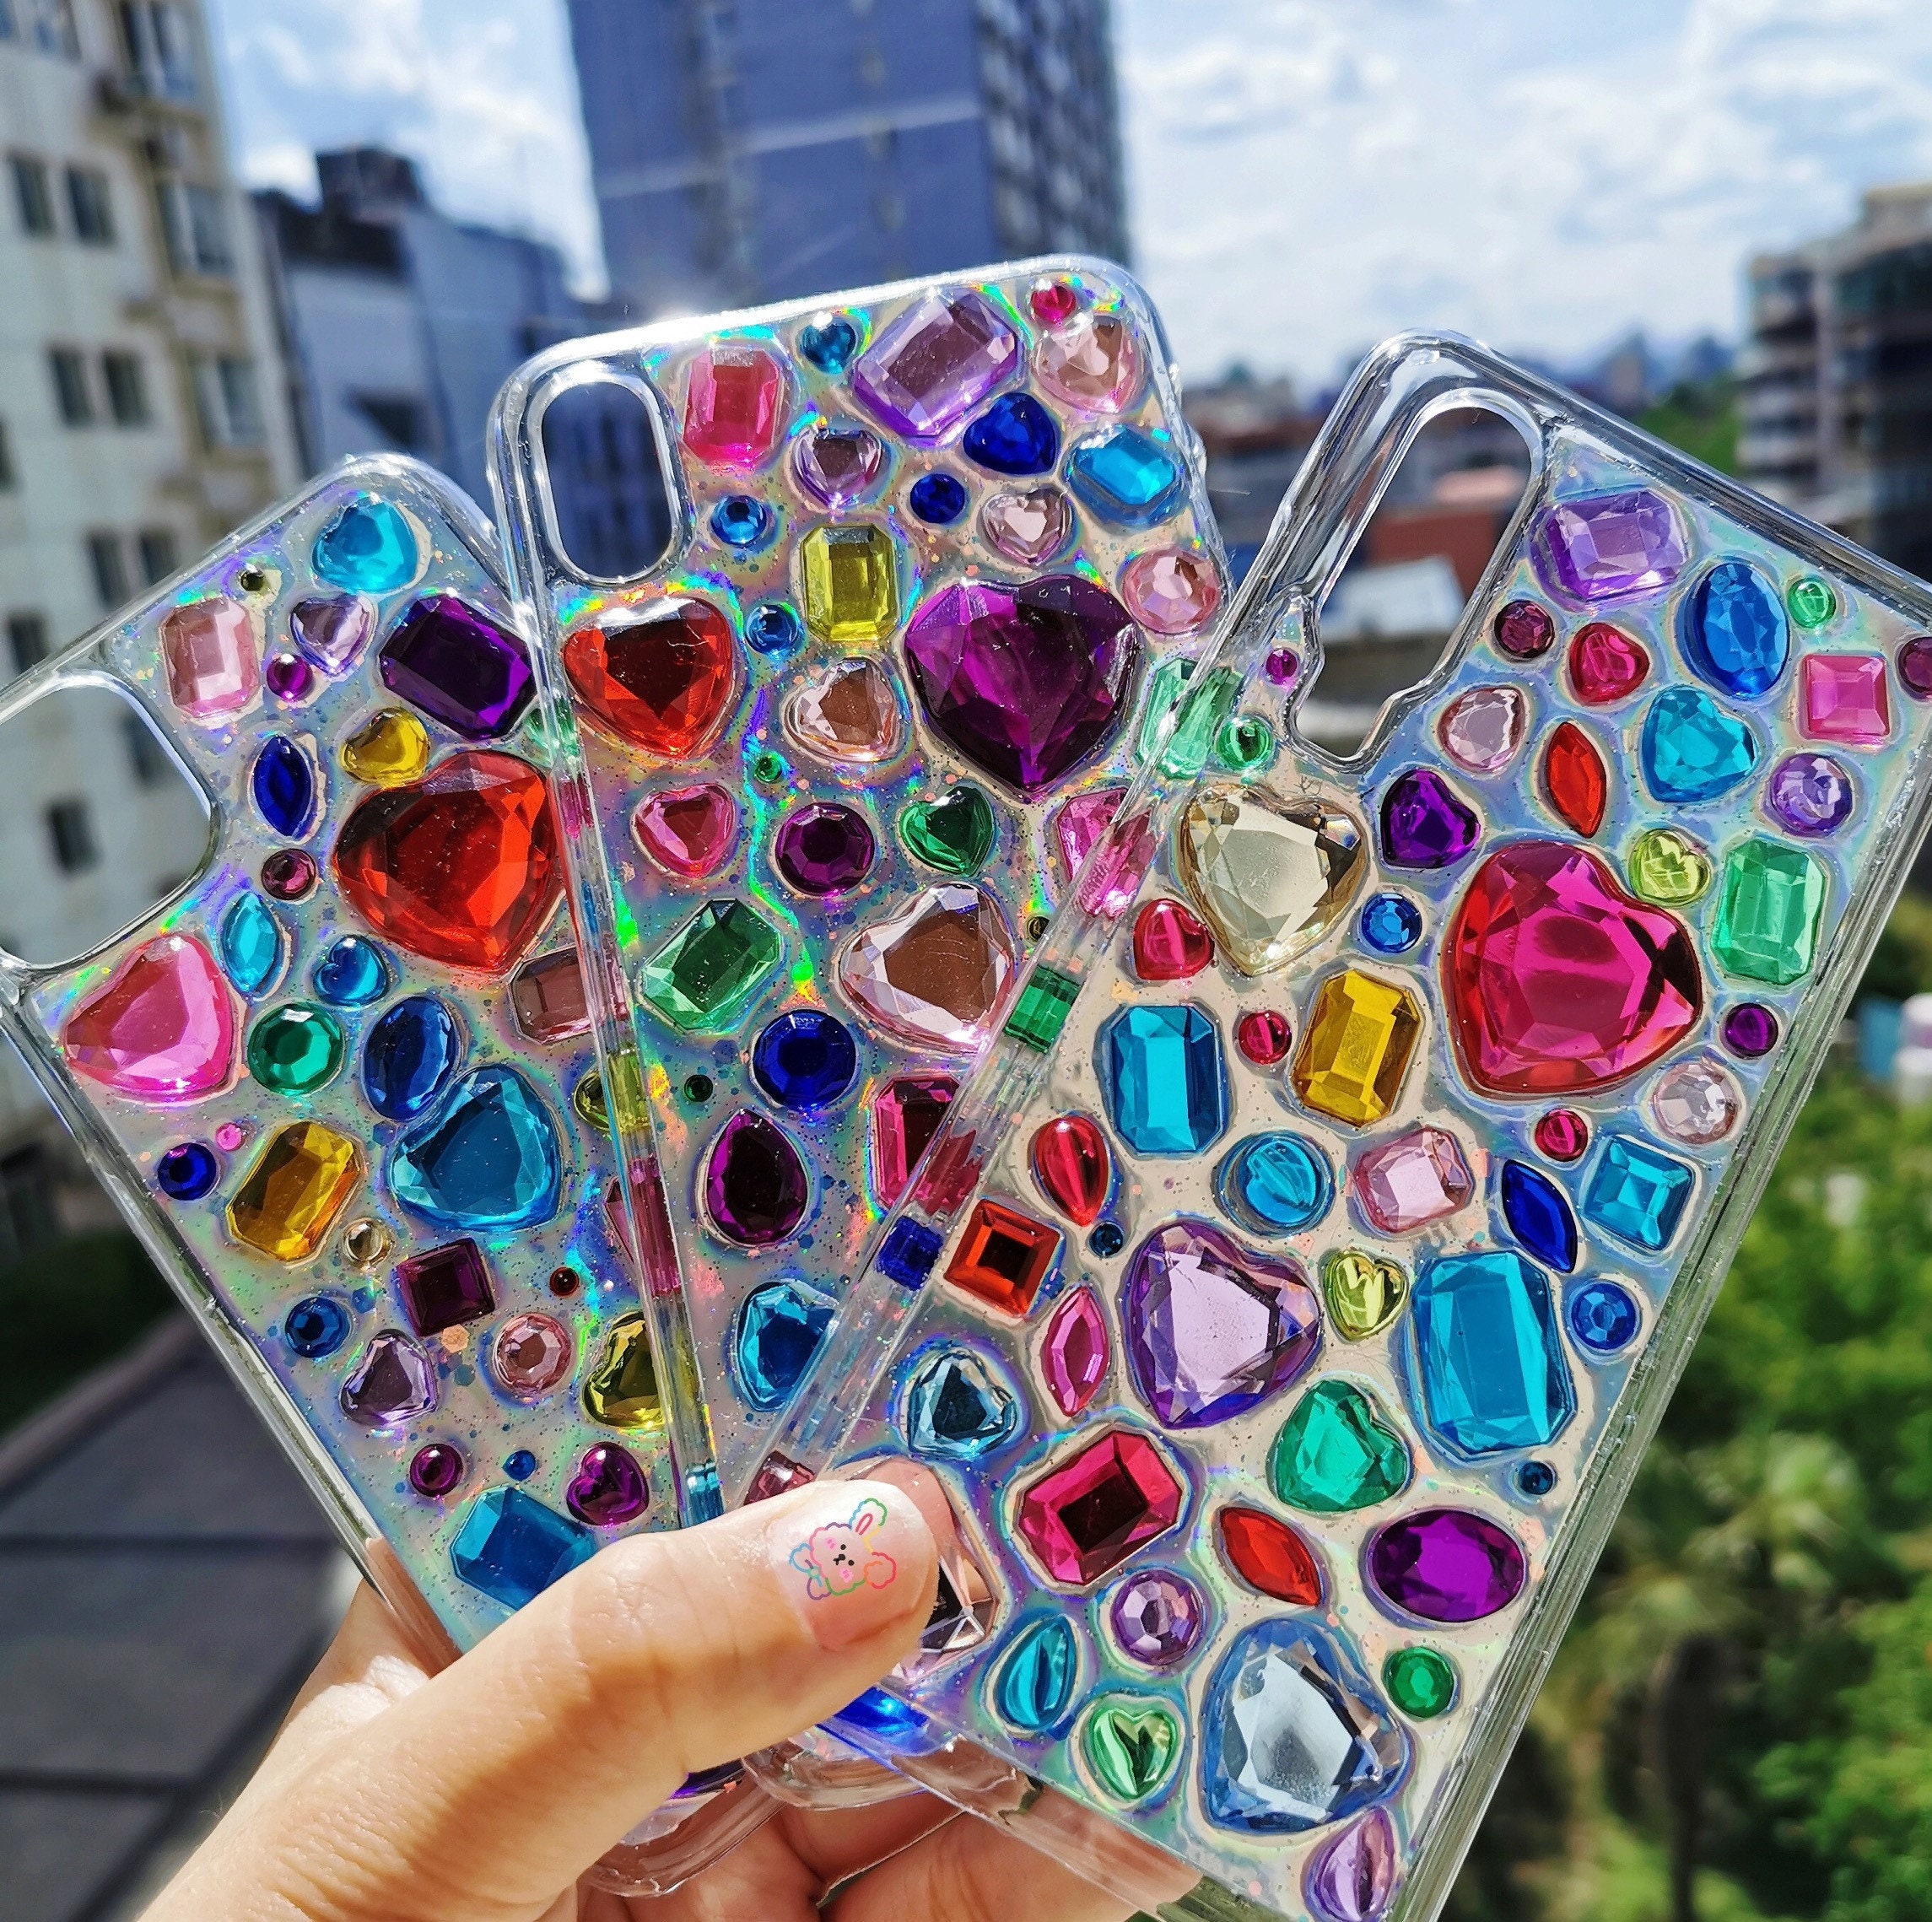 Maxleaf 10Sheets (360PCS) Clear Colorful Heart Jewels Rhinestone Diamond  Stickers for Crafts Phone Case Kids Gifts Keyboards Laptops, Self Adhesive